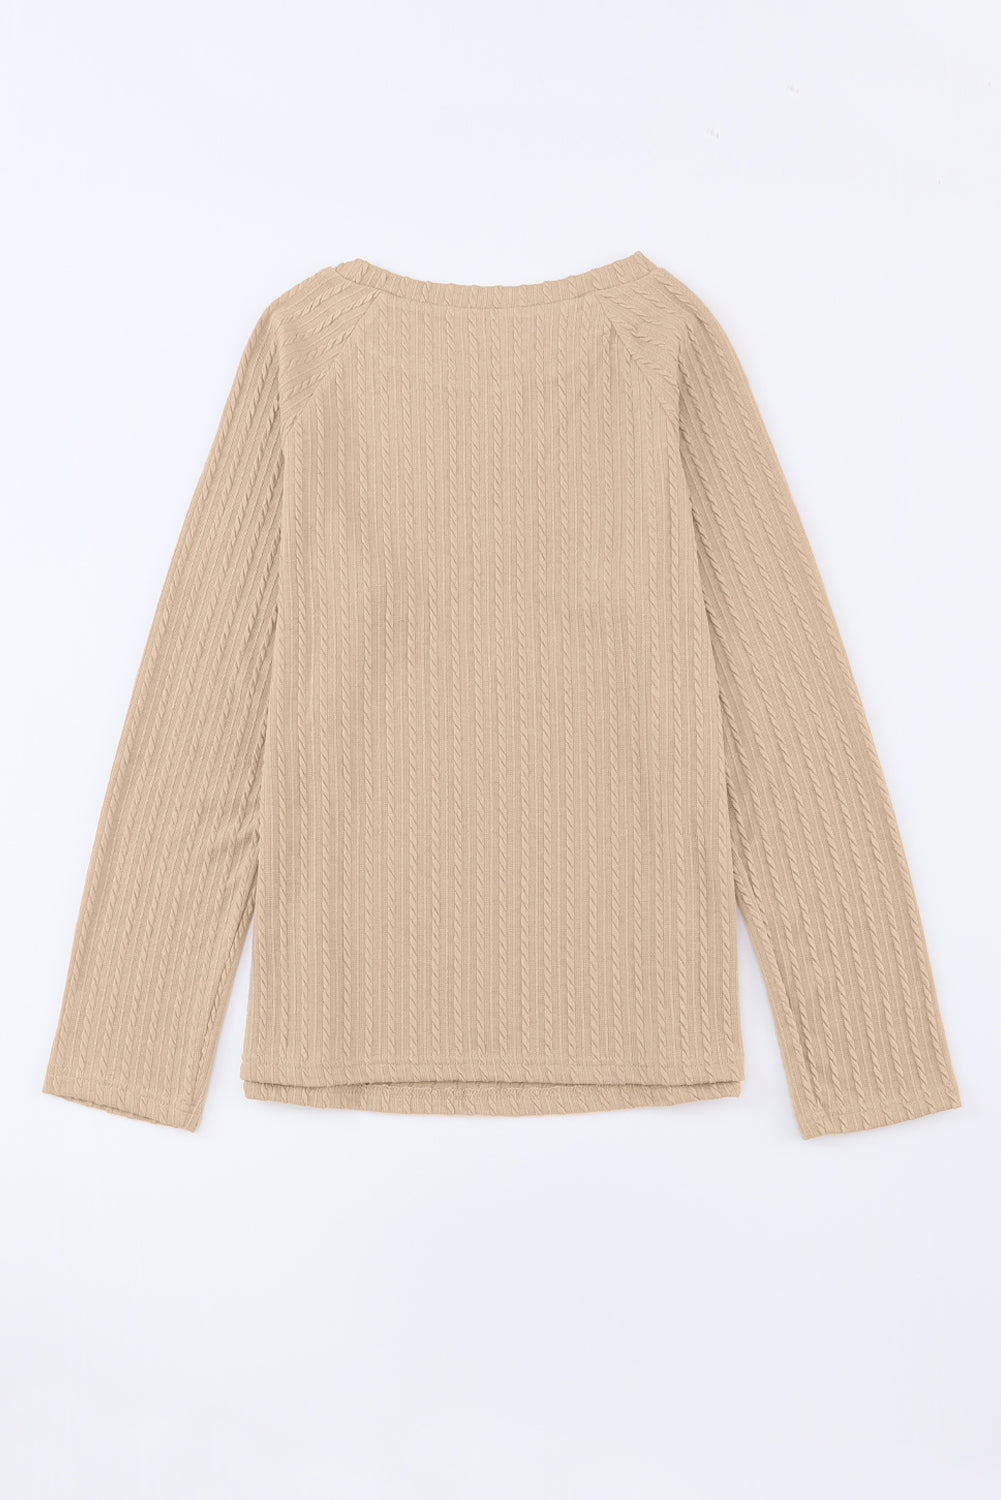 Black Ribbed Round Neck Knit Long Sleeve Top